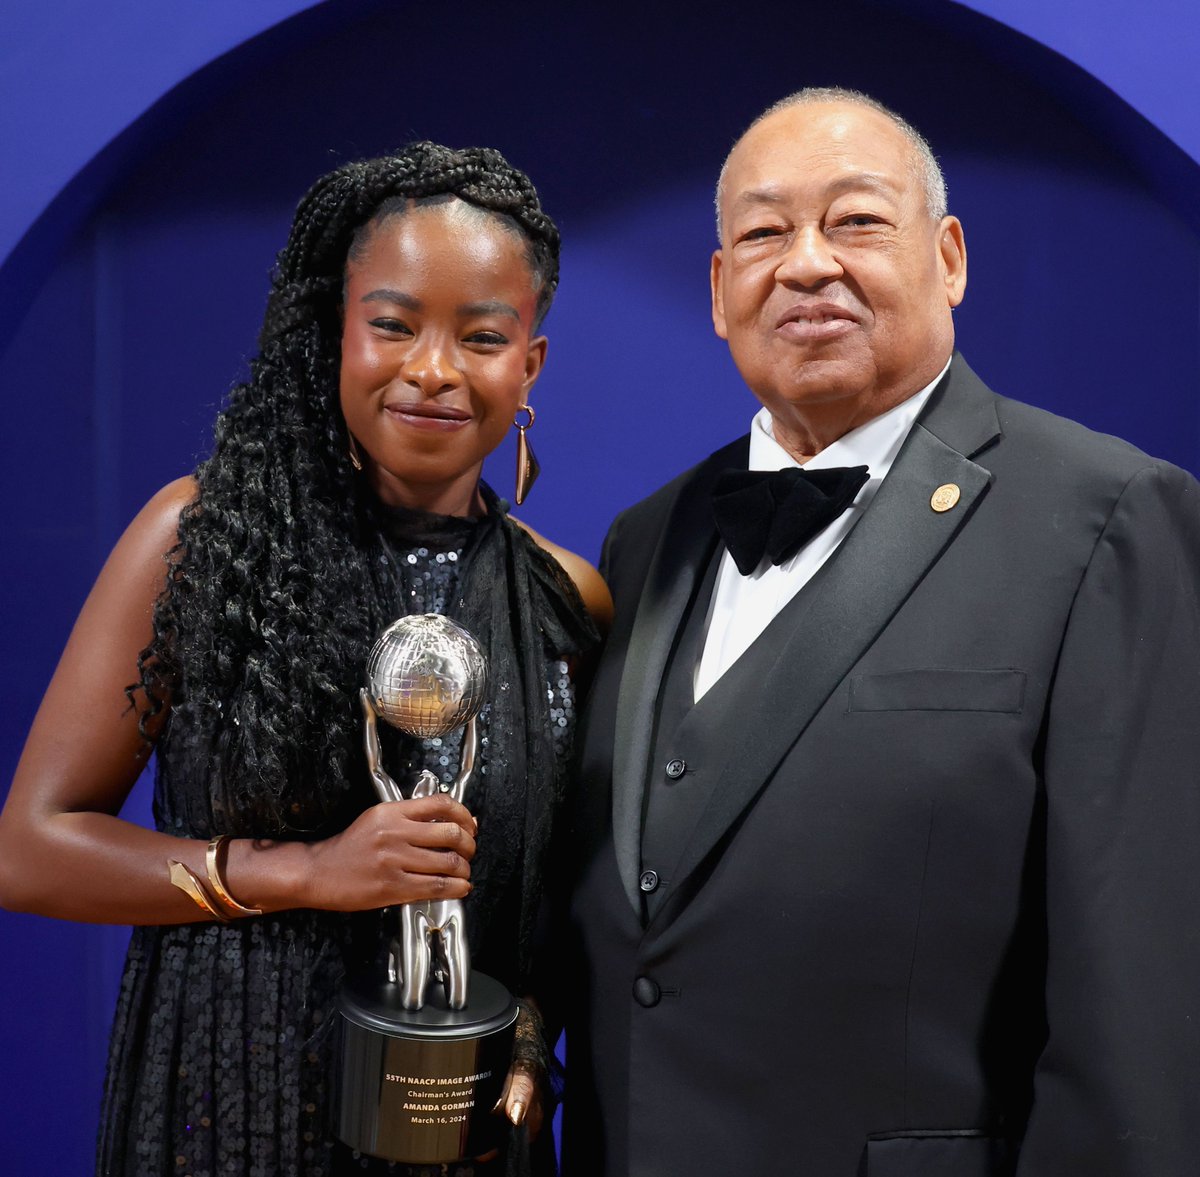 Congratulations to @TheAmandaGorman, the winner of the Chairman's Award at the 55th #NAACPImageAwards. #BrillianceRecognized presented by @crest.